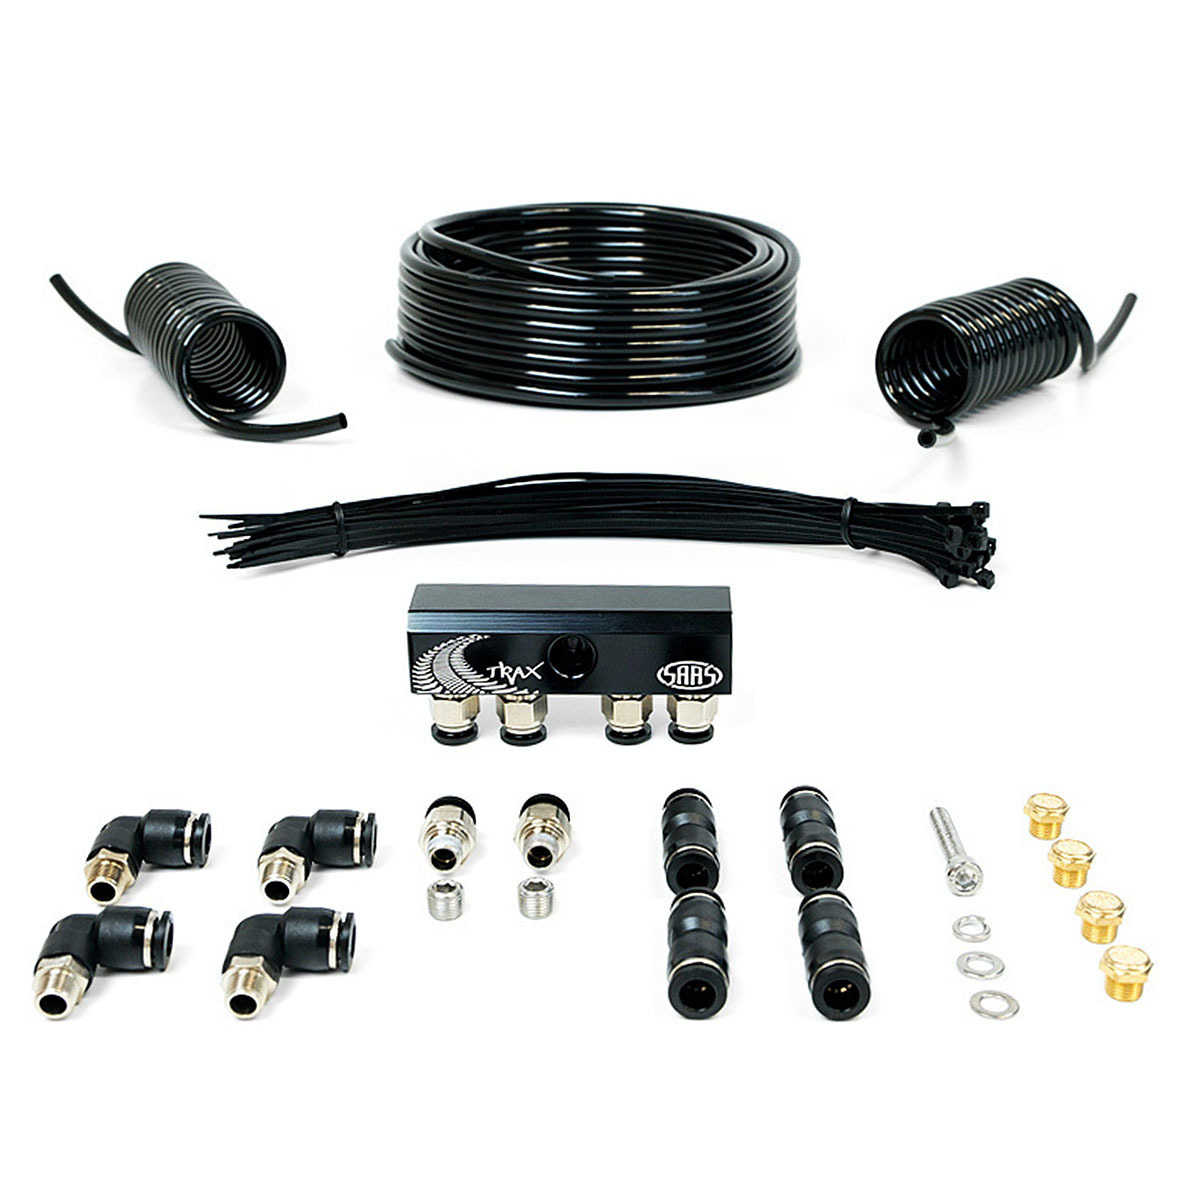 DIFF BREATHER KIT fits most 4x4 without the need of adaptors